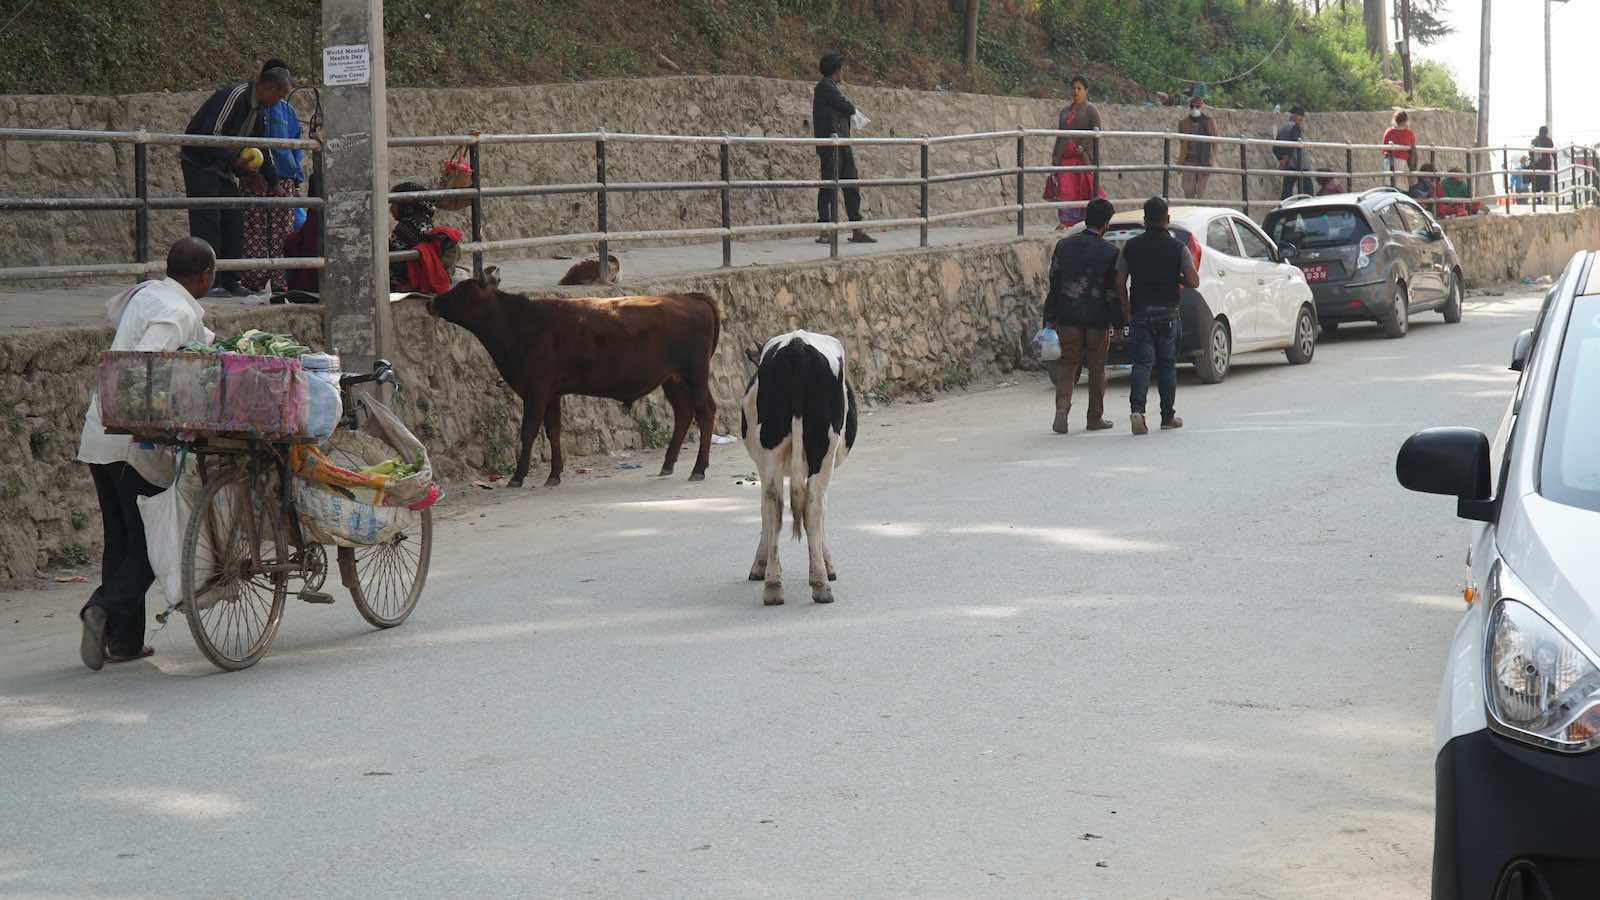 Street cows were also a common sight along the roads here.